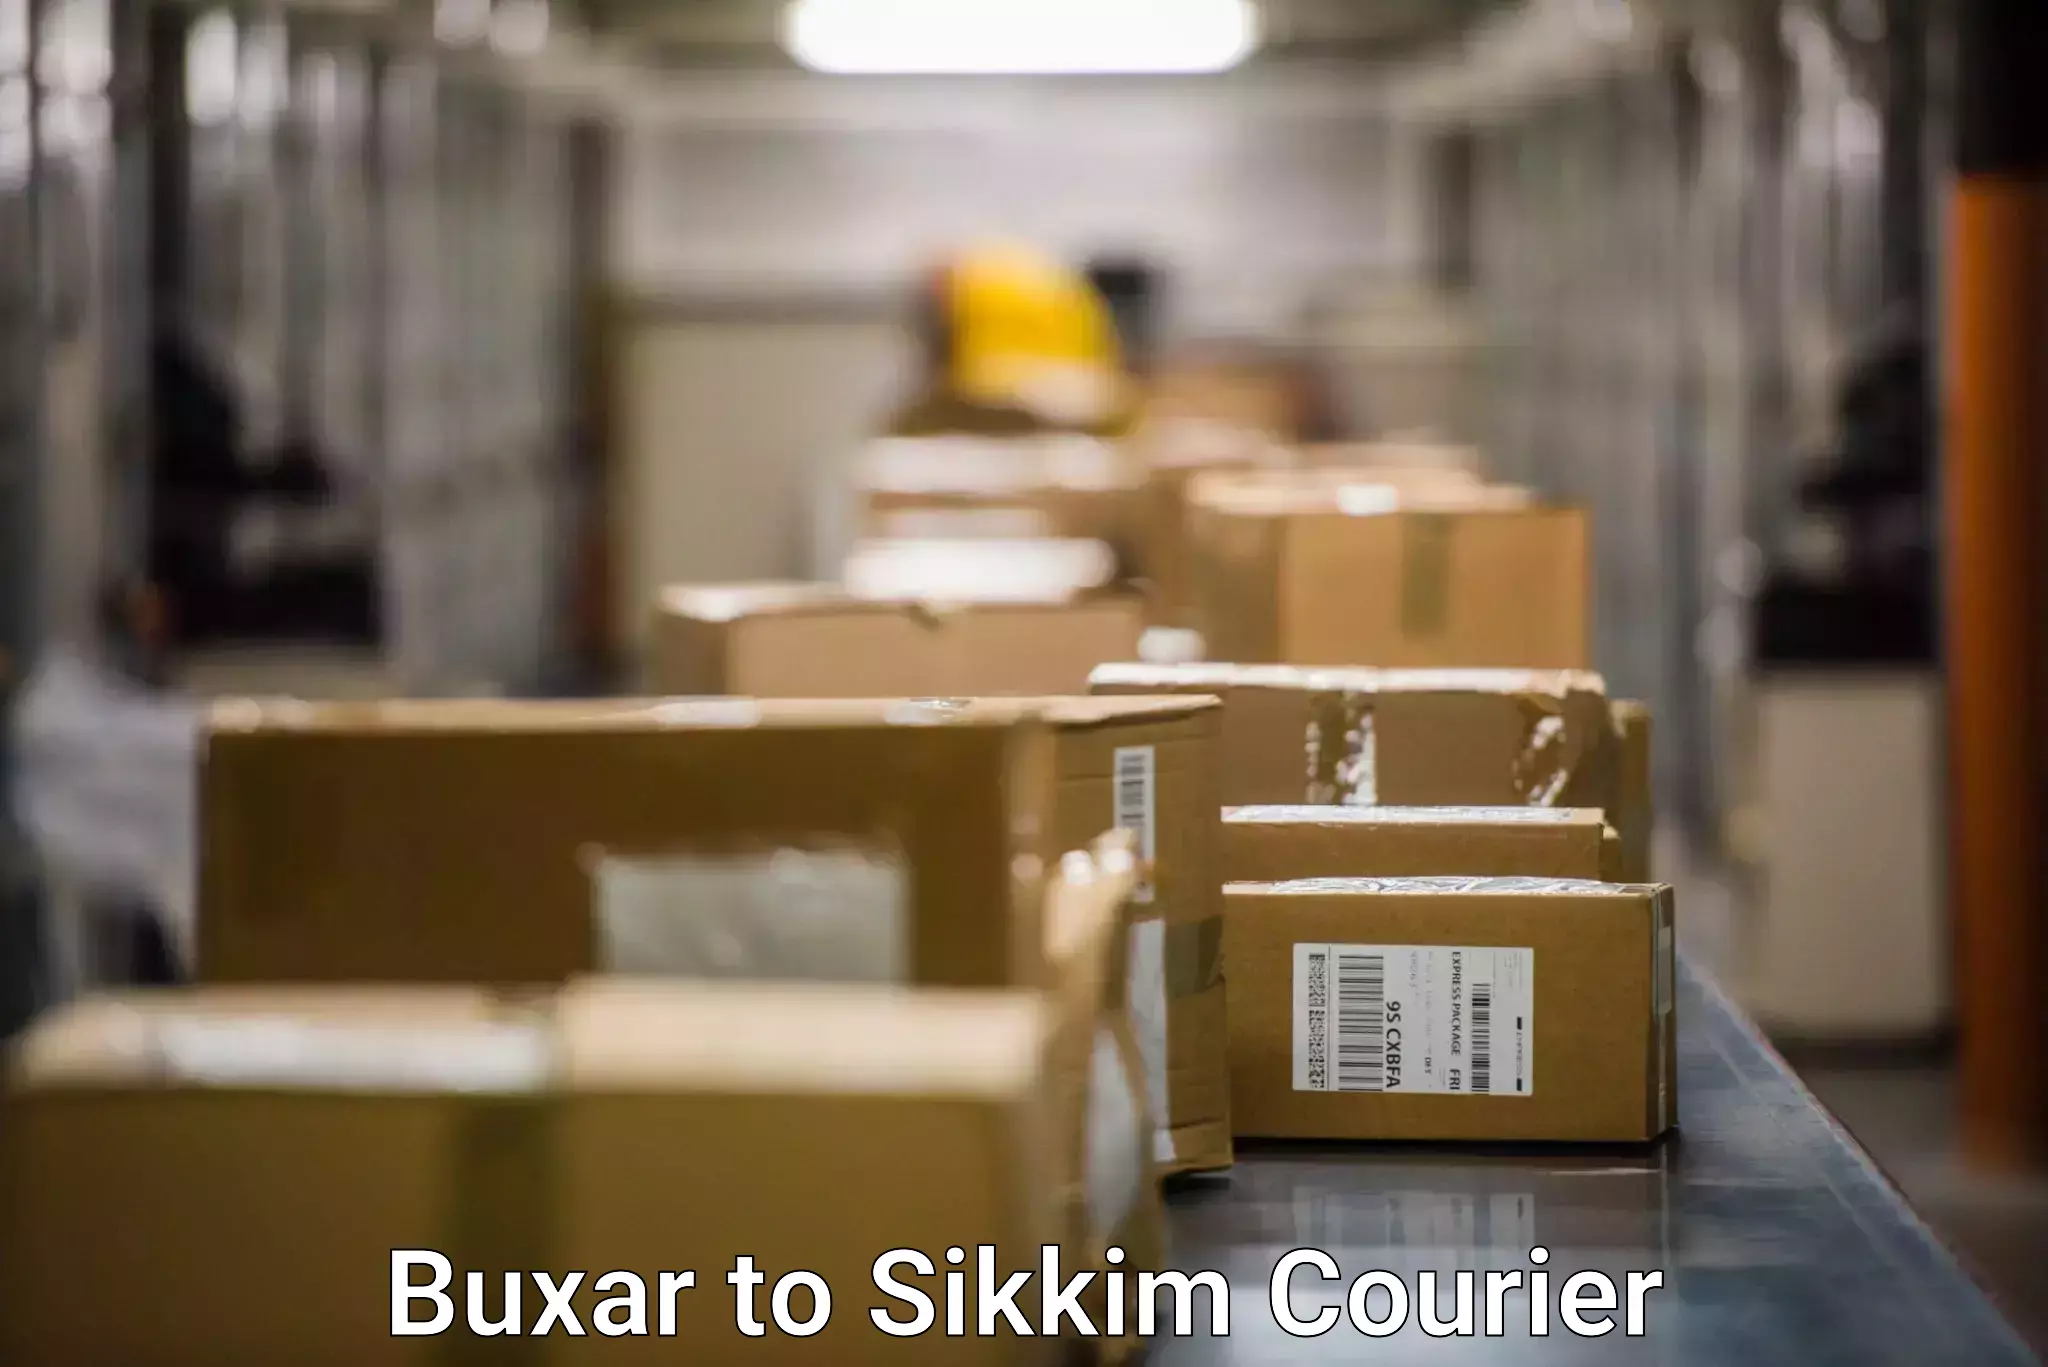 State-of-the-art courier technology Buxar to Geyzing